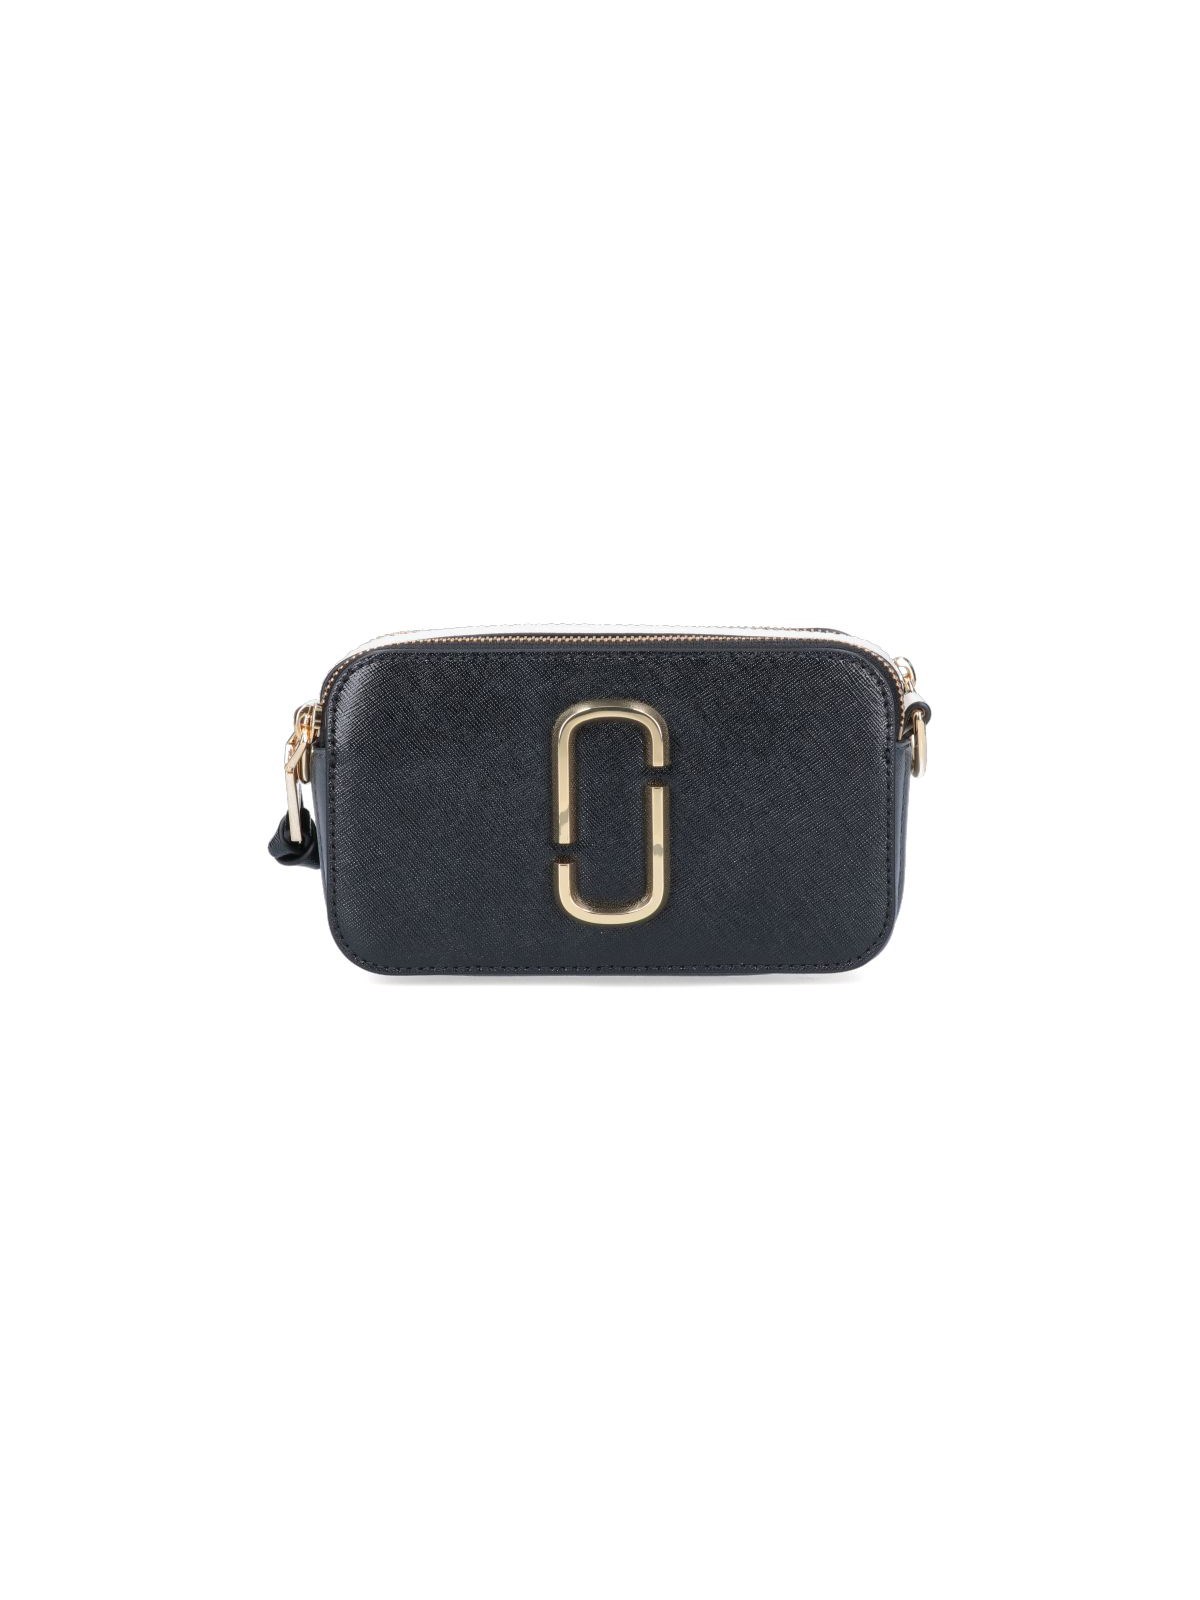 Marc Jacobs The Colorblock Snapshot Bag, Nordstrom